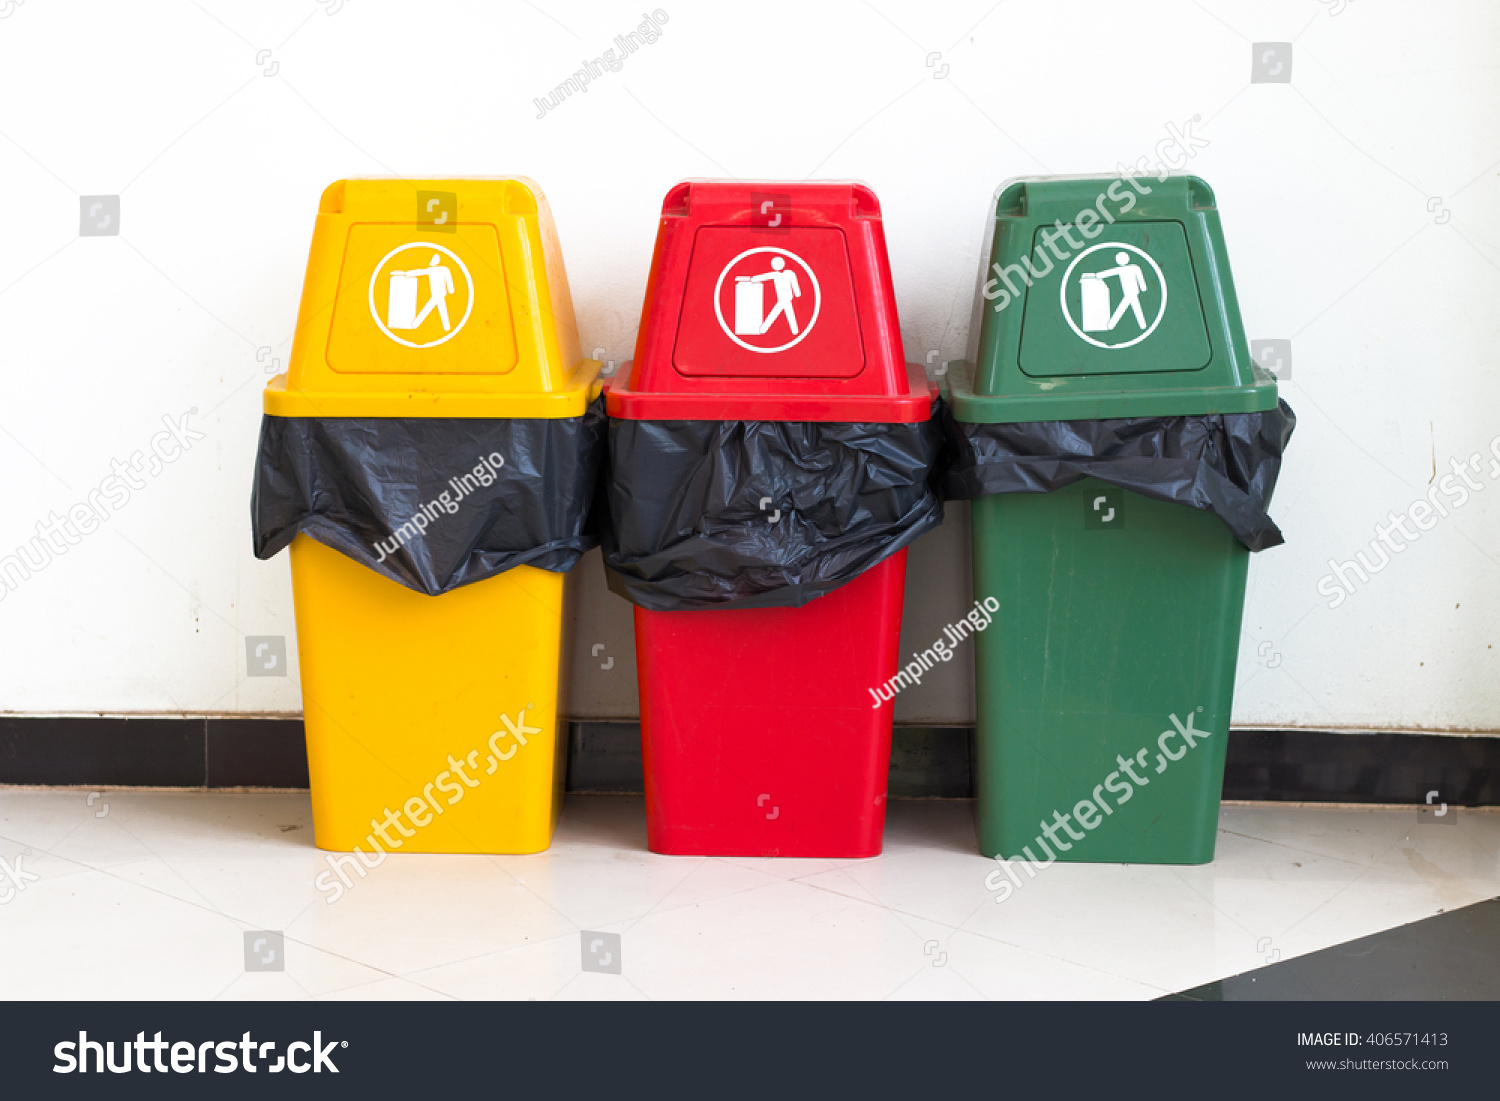 Download Yellow Red Green Bins Trashcans Miscellaneous Stock Image 406571413 Yellowimages Mockups